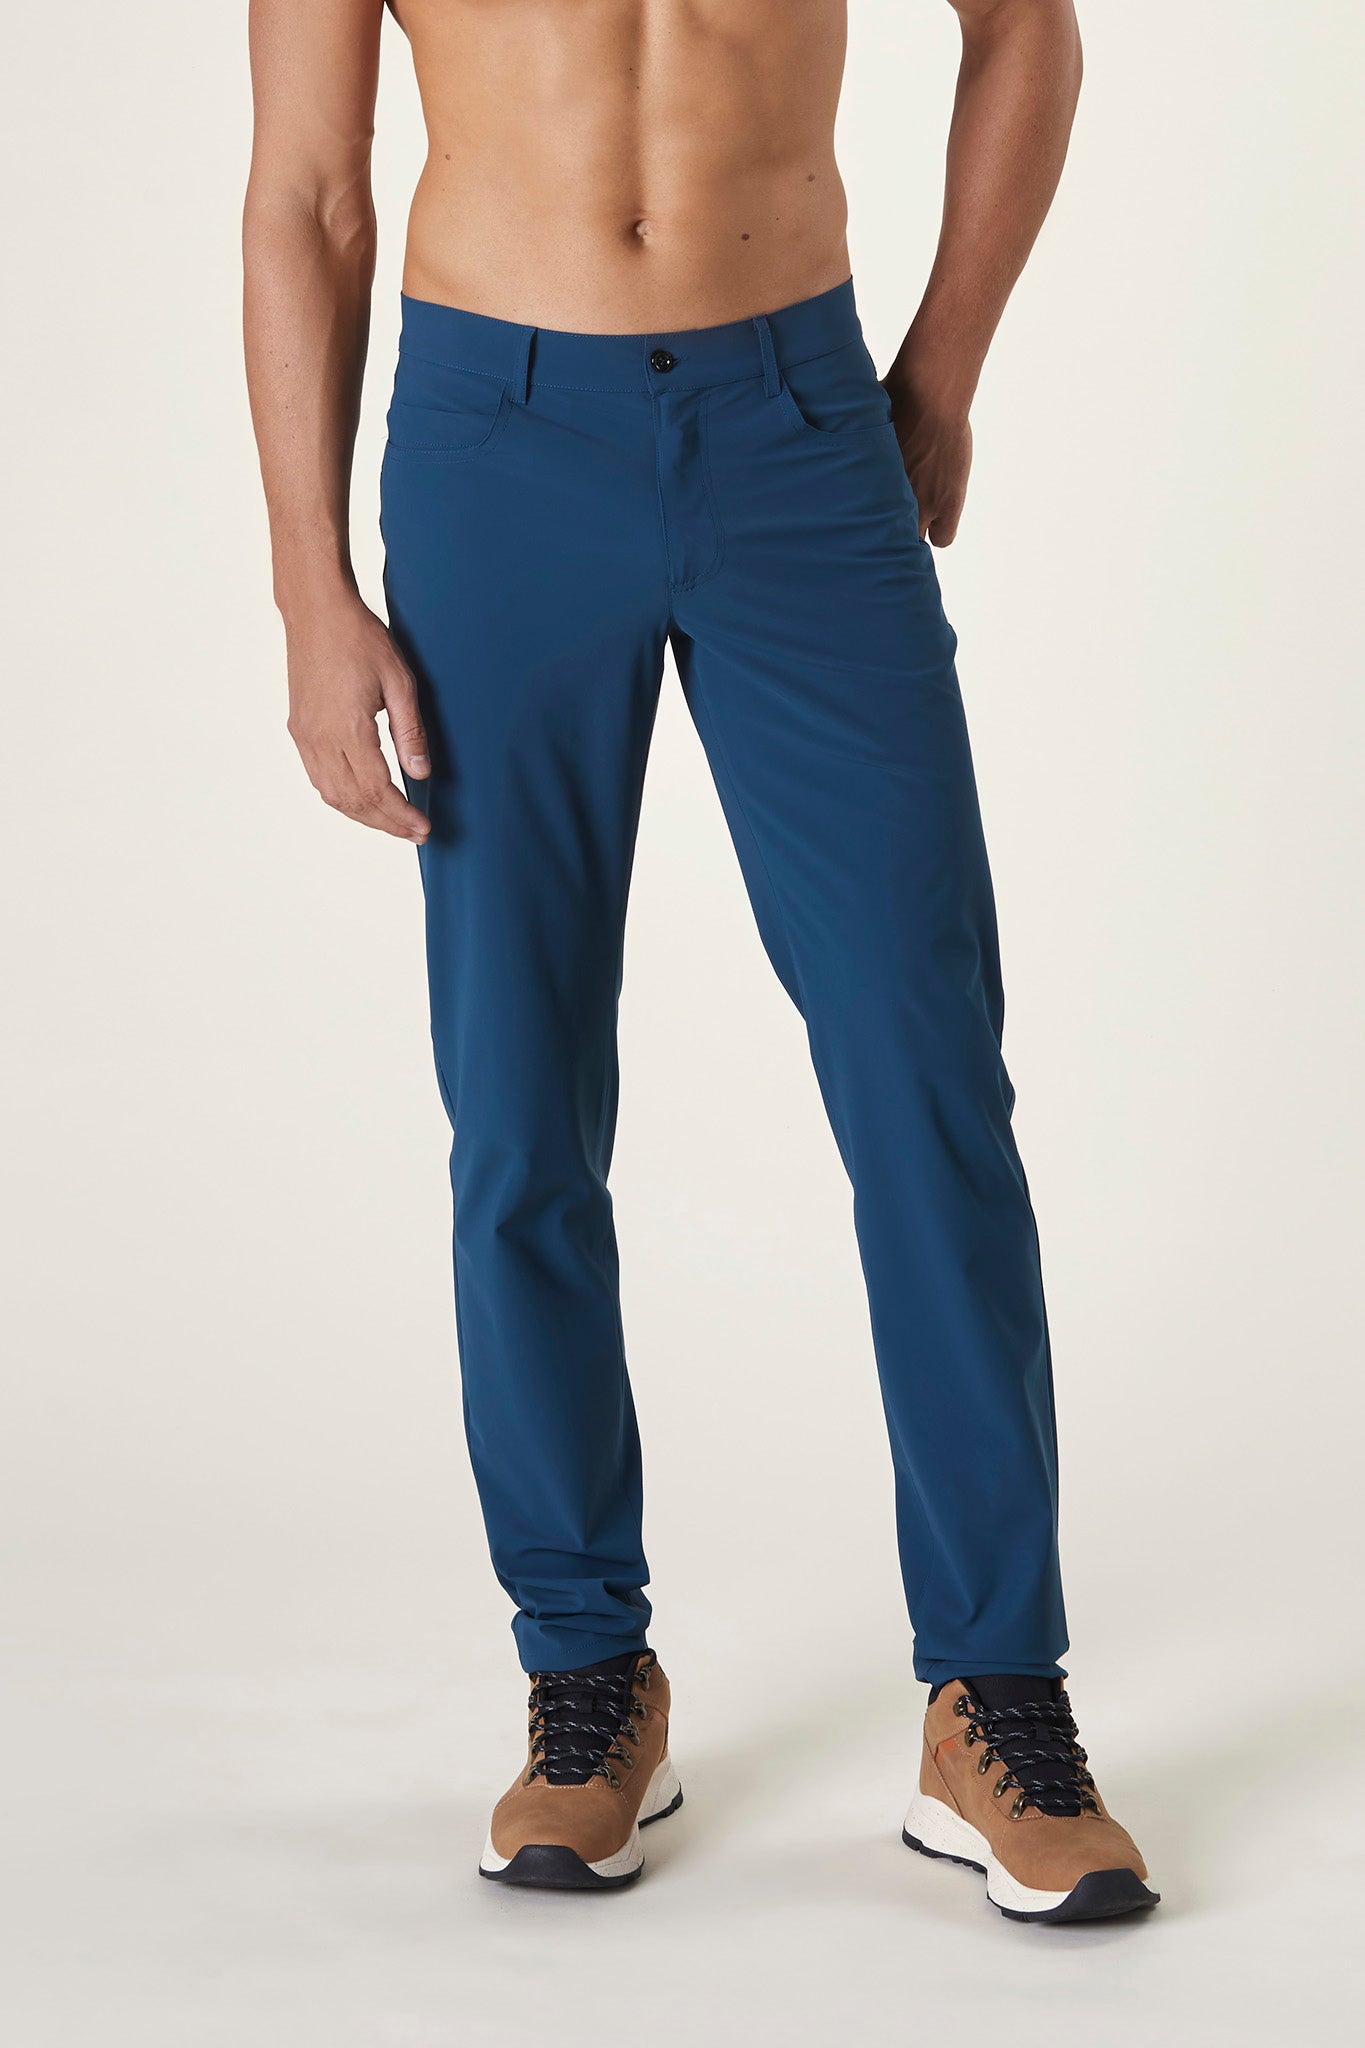 Technical men's trousers - Teal - Rupe PRO Line 